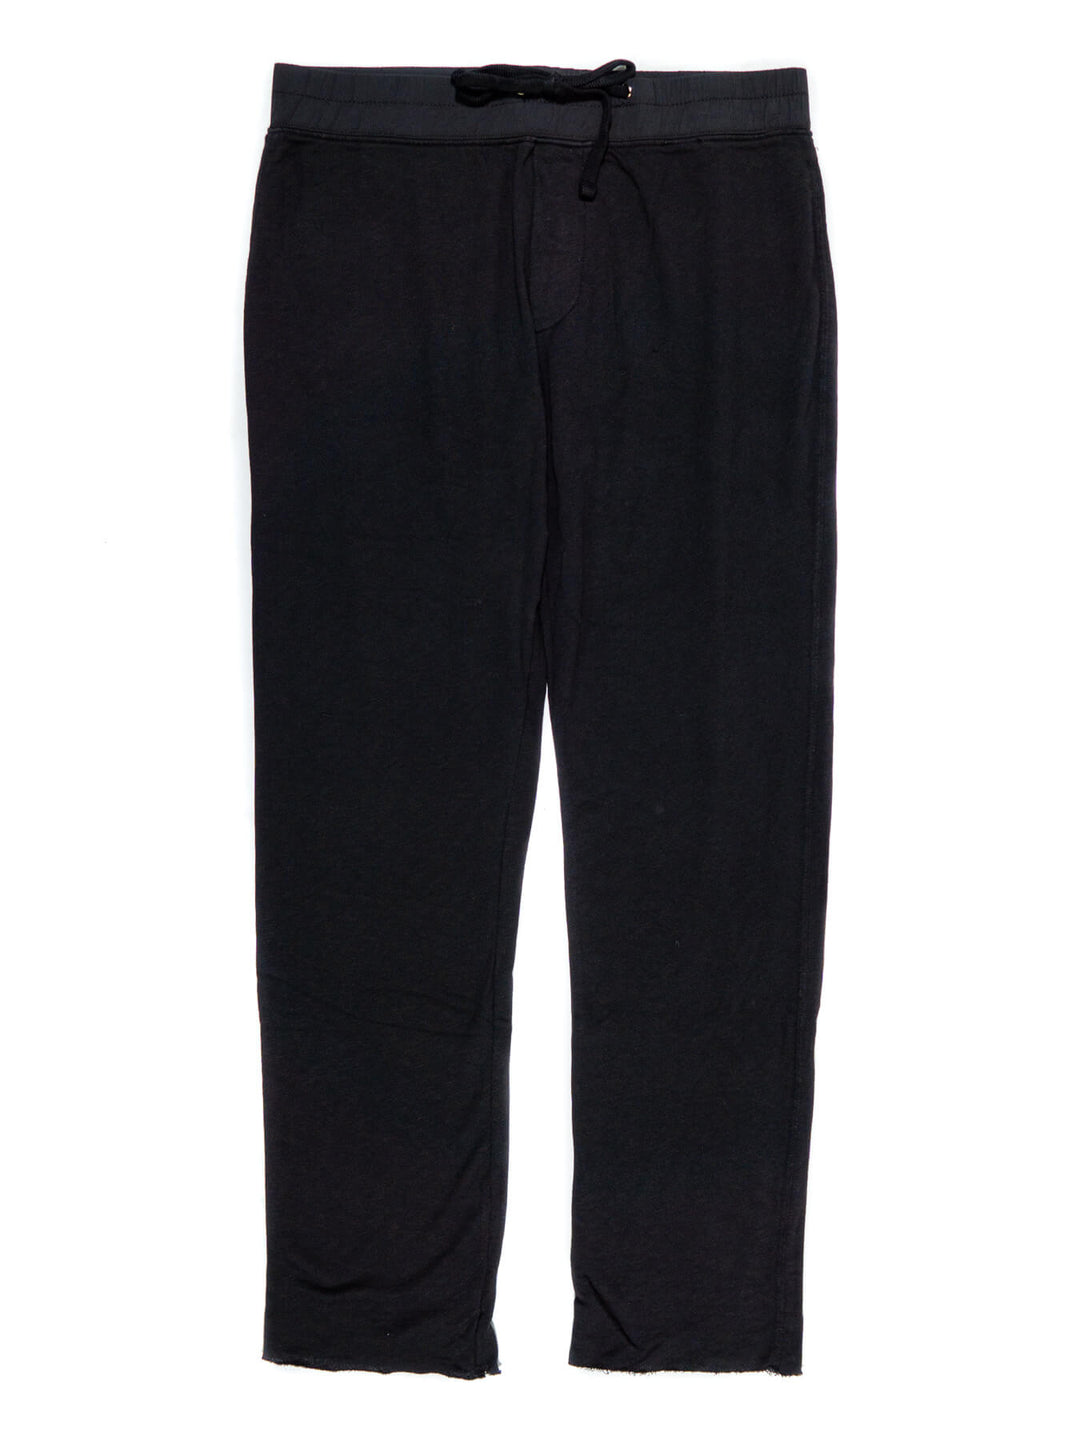 JAMES PERSE FRENCH TERRY SWEATPANT IN BLACK